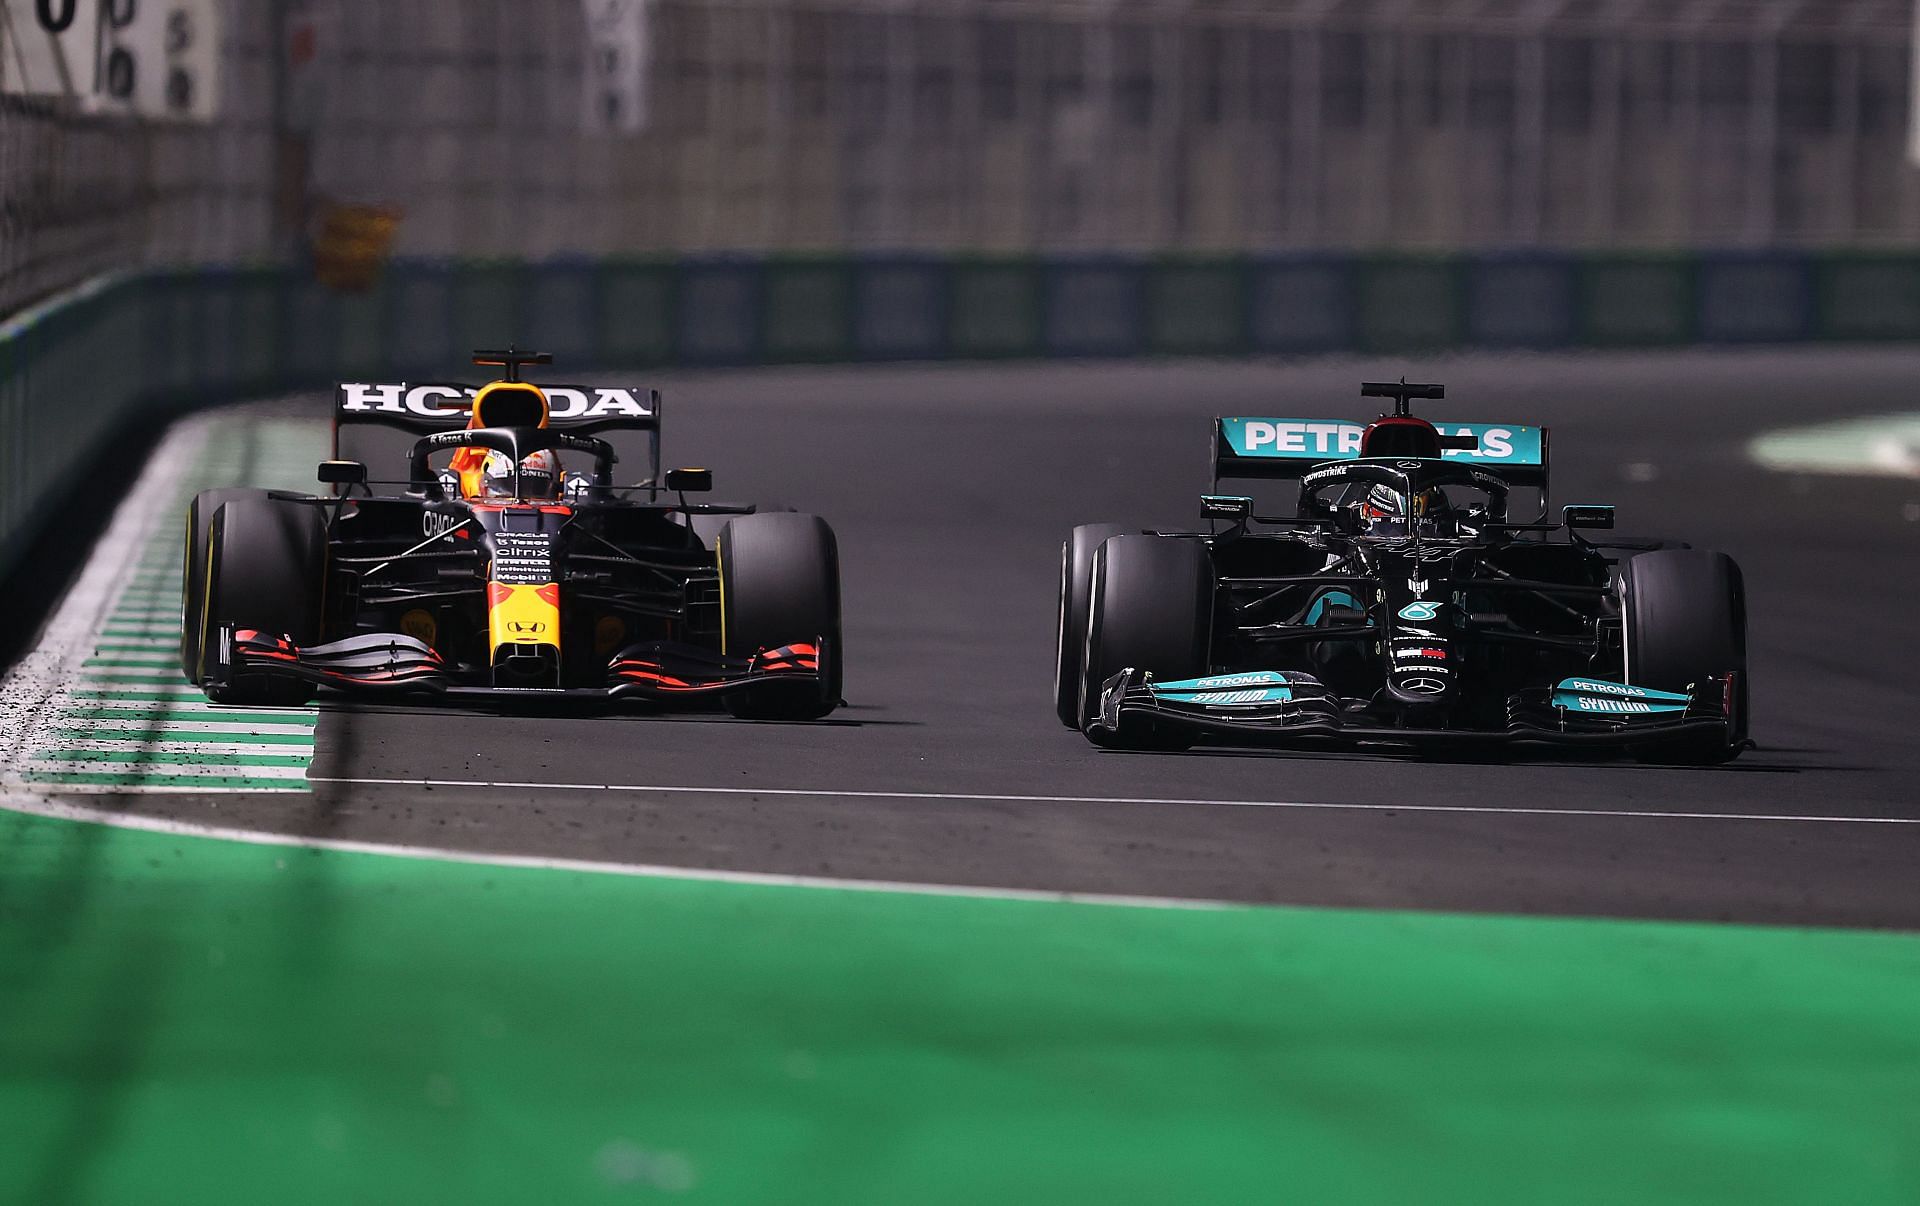 Max Verstappen and Lewis Hamilton battling for position in the 2021 Saudi Arabian Grand Prix. (Photo by Lars Baron/Getty Images)